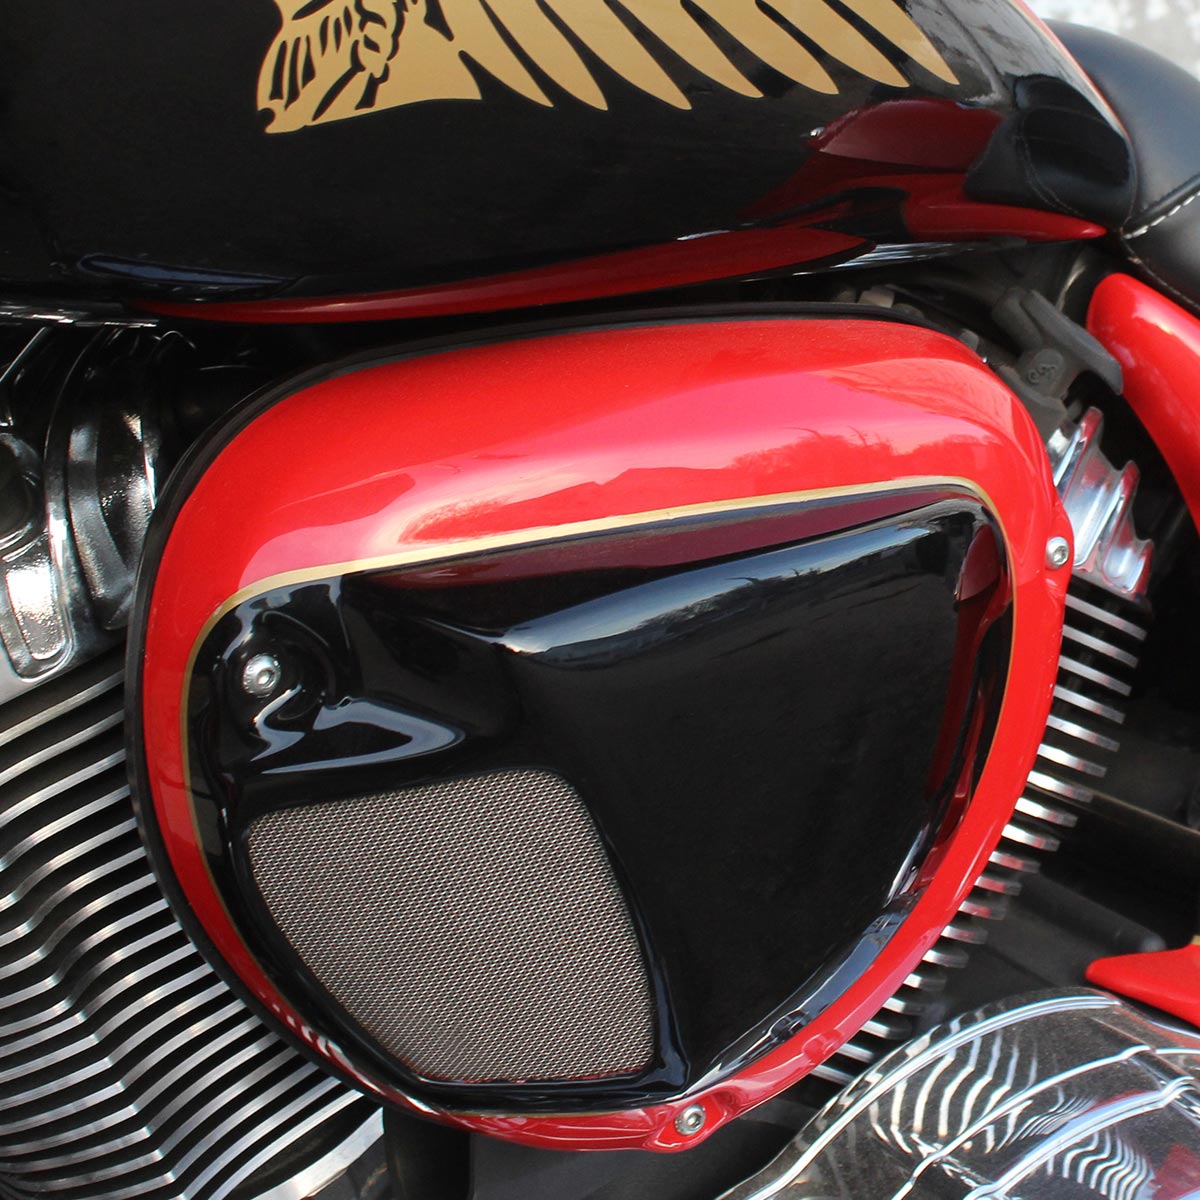 Reytelo Air Cleaner Cover for Indian® Motorcycles shown on 2017 Chieftain